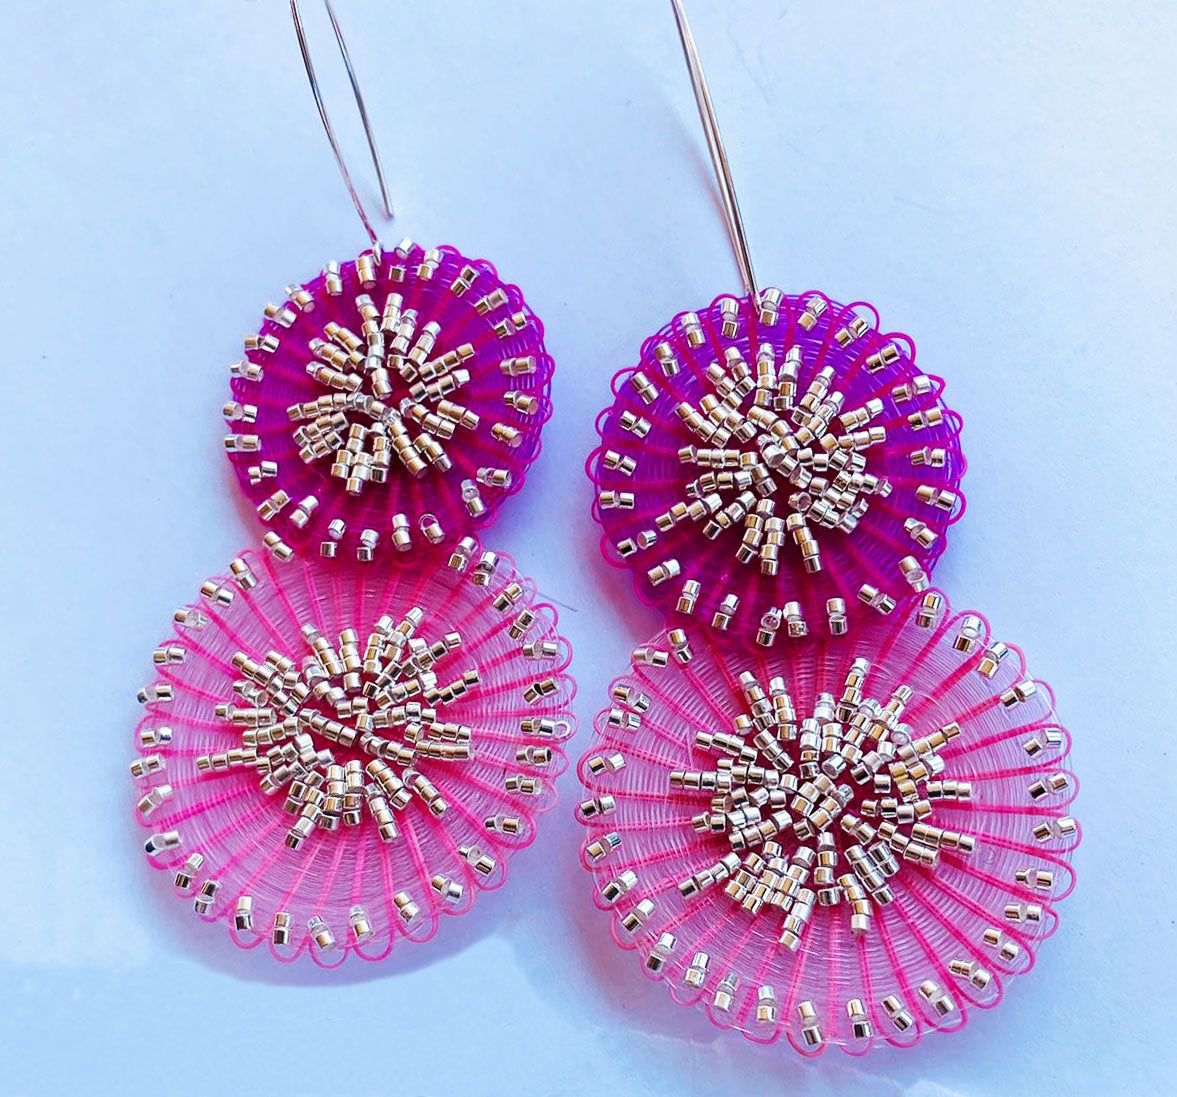 Crin Earrings with Silver Beads by Chantal Bernsau- Fuschsia and Pink